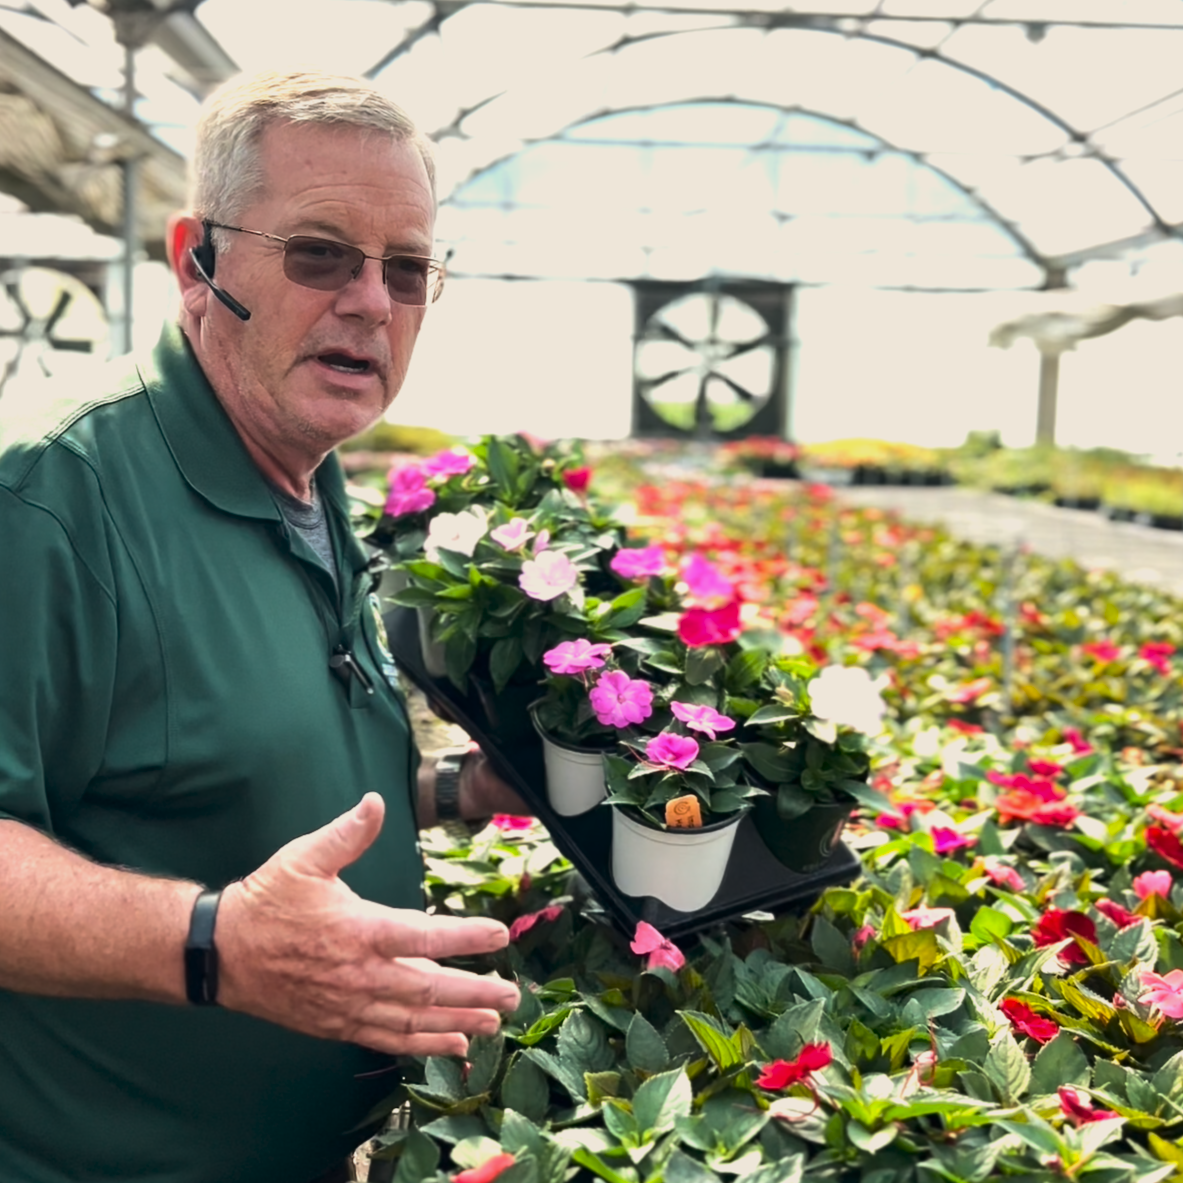 An exquisite arrangement of Greenstreet Growers' Impatiens annuals radiates with a diverse mix of colors, each plant thriving through our eco-conscious cultivation practices, exemplifying our pledge to creating spectacular, sustainable gardens.